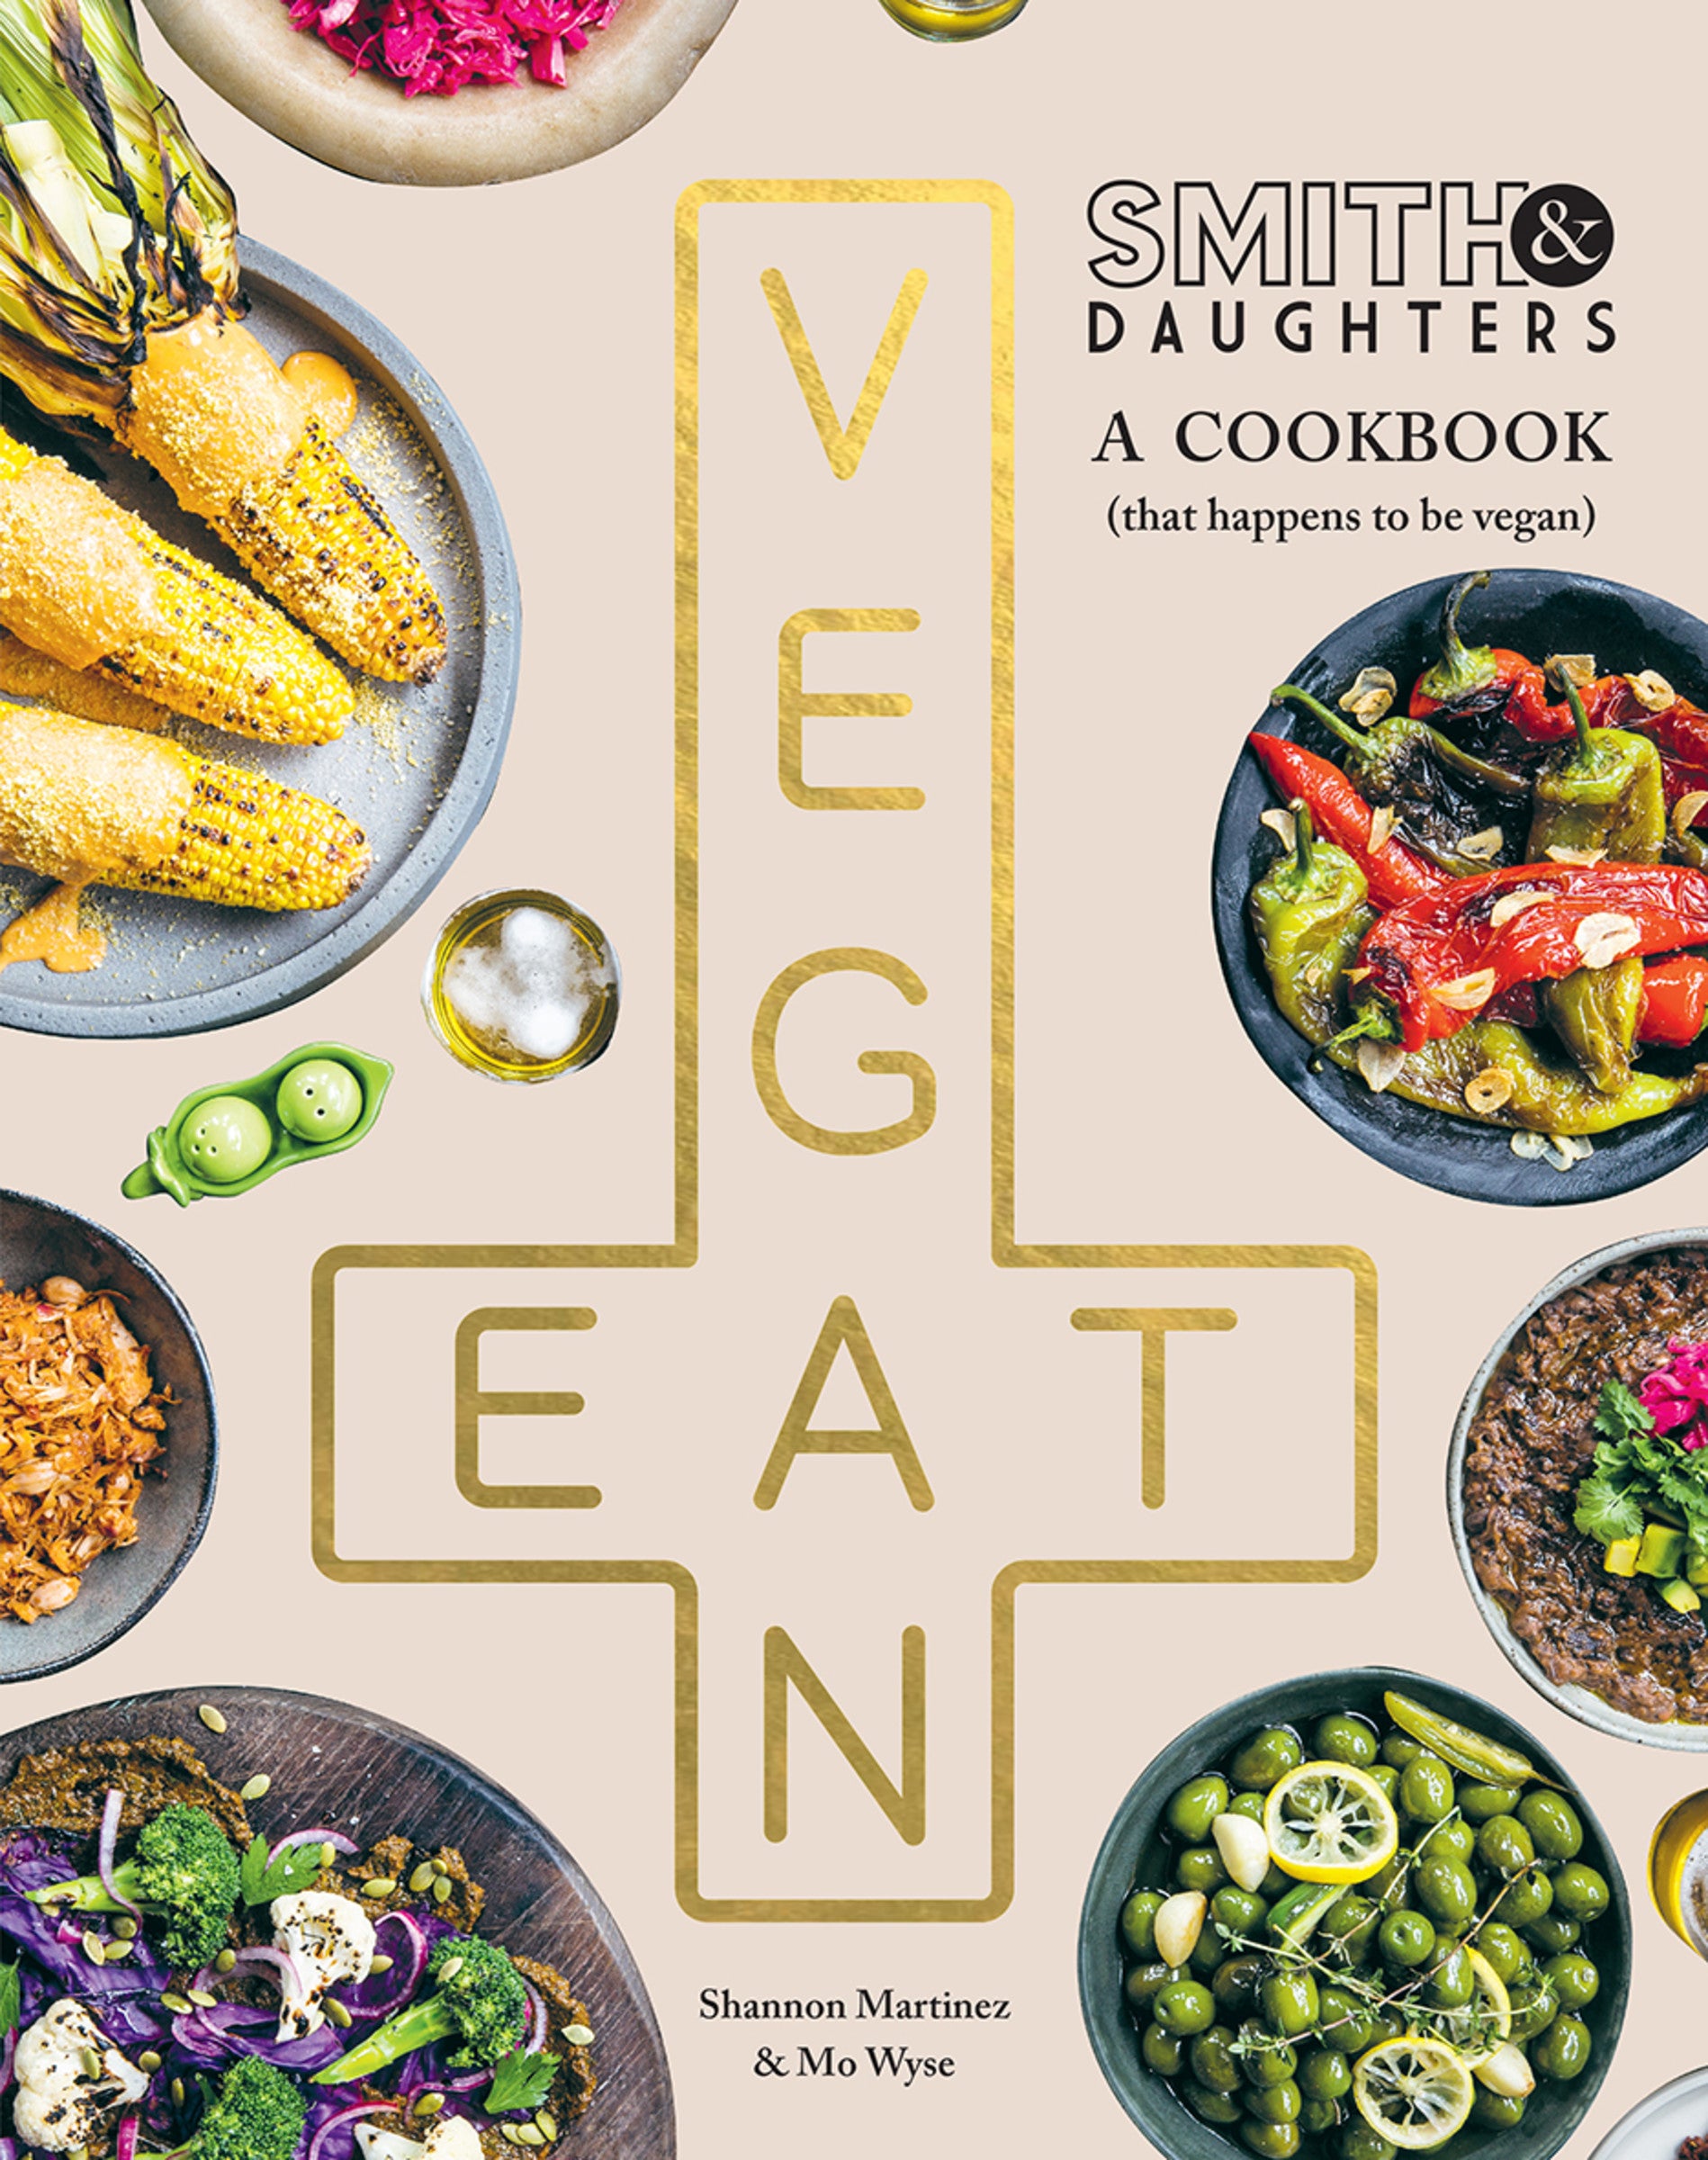 Smith &amp; Daughters: A Cookbook (That Happens to be Vegan)